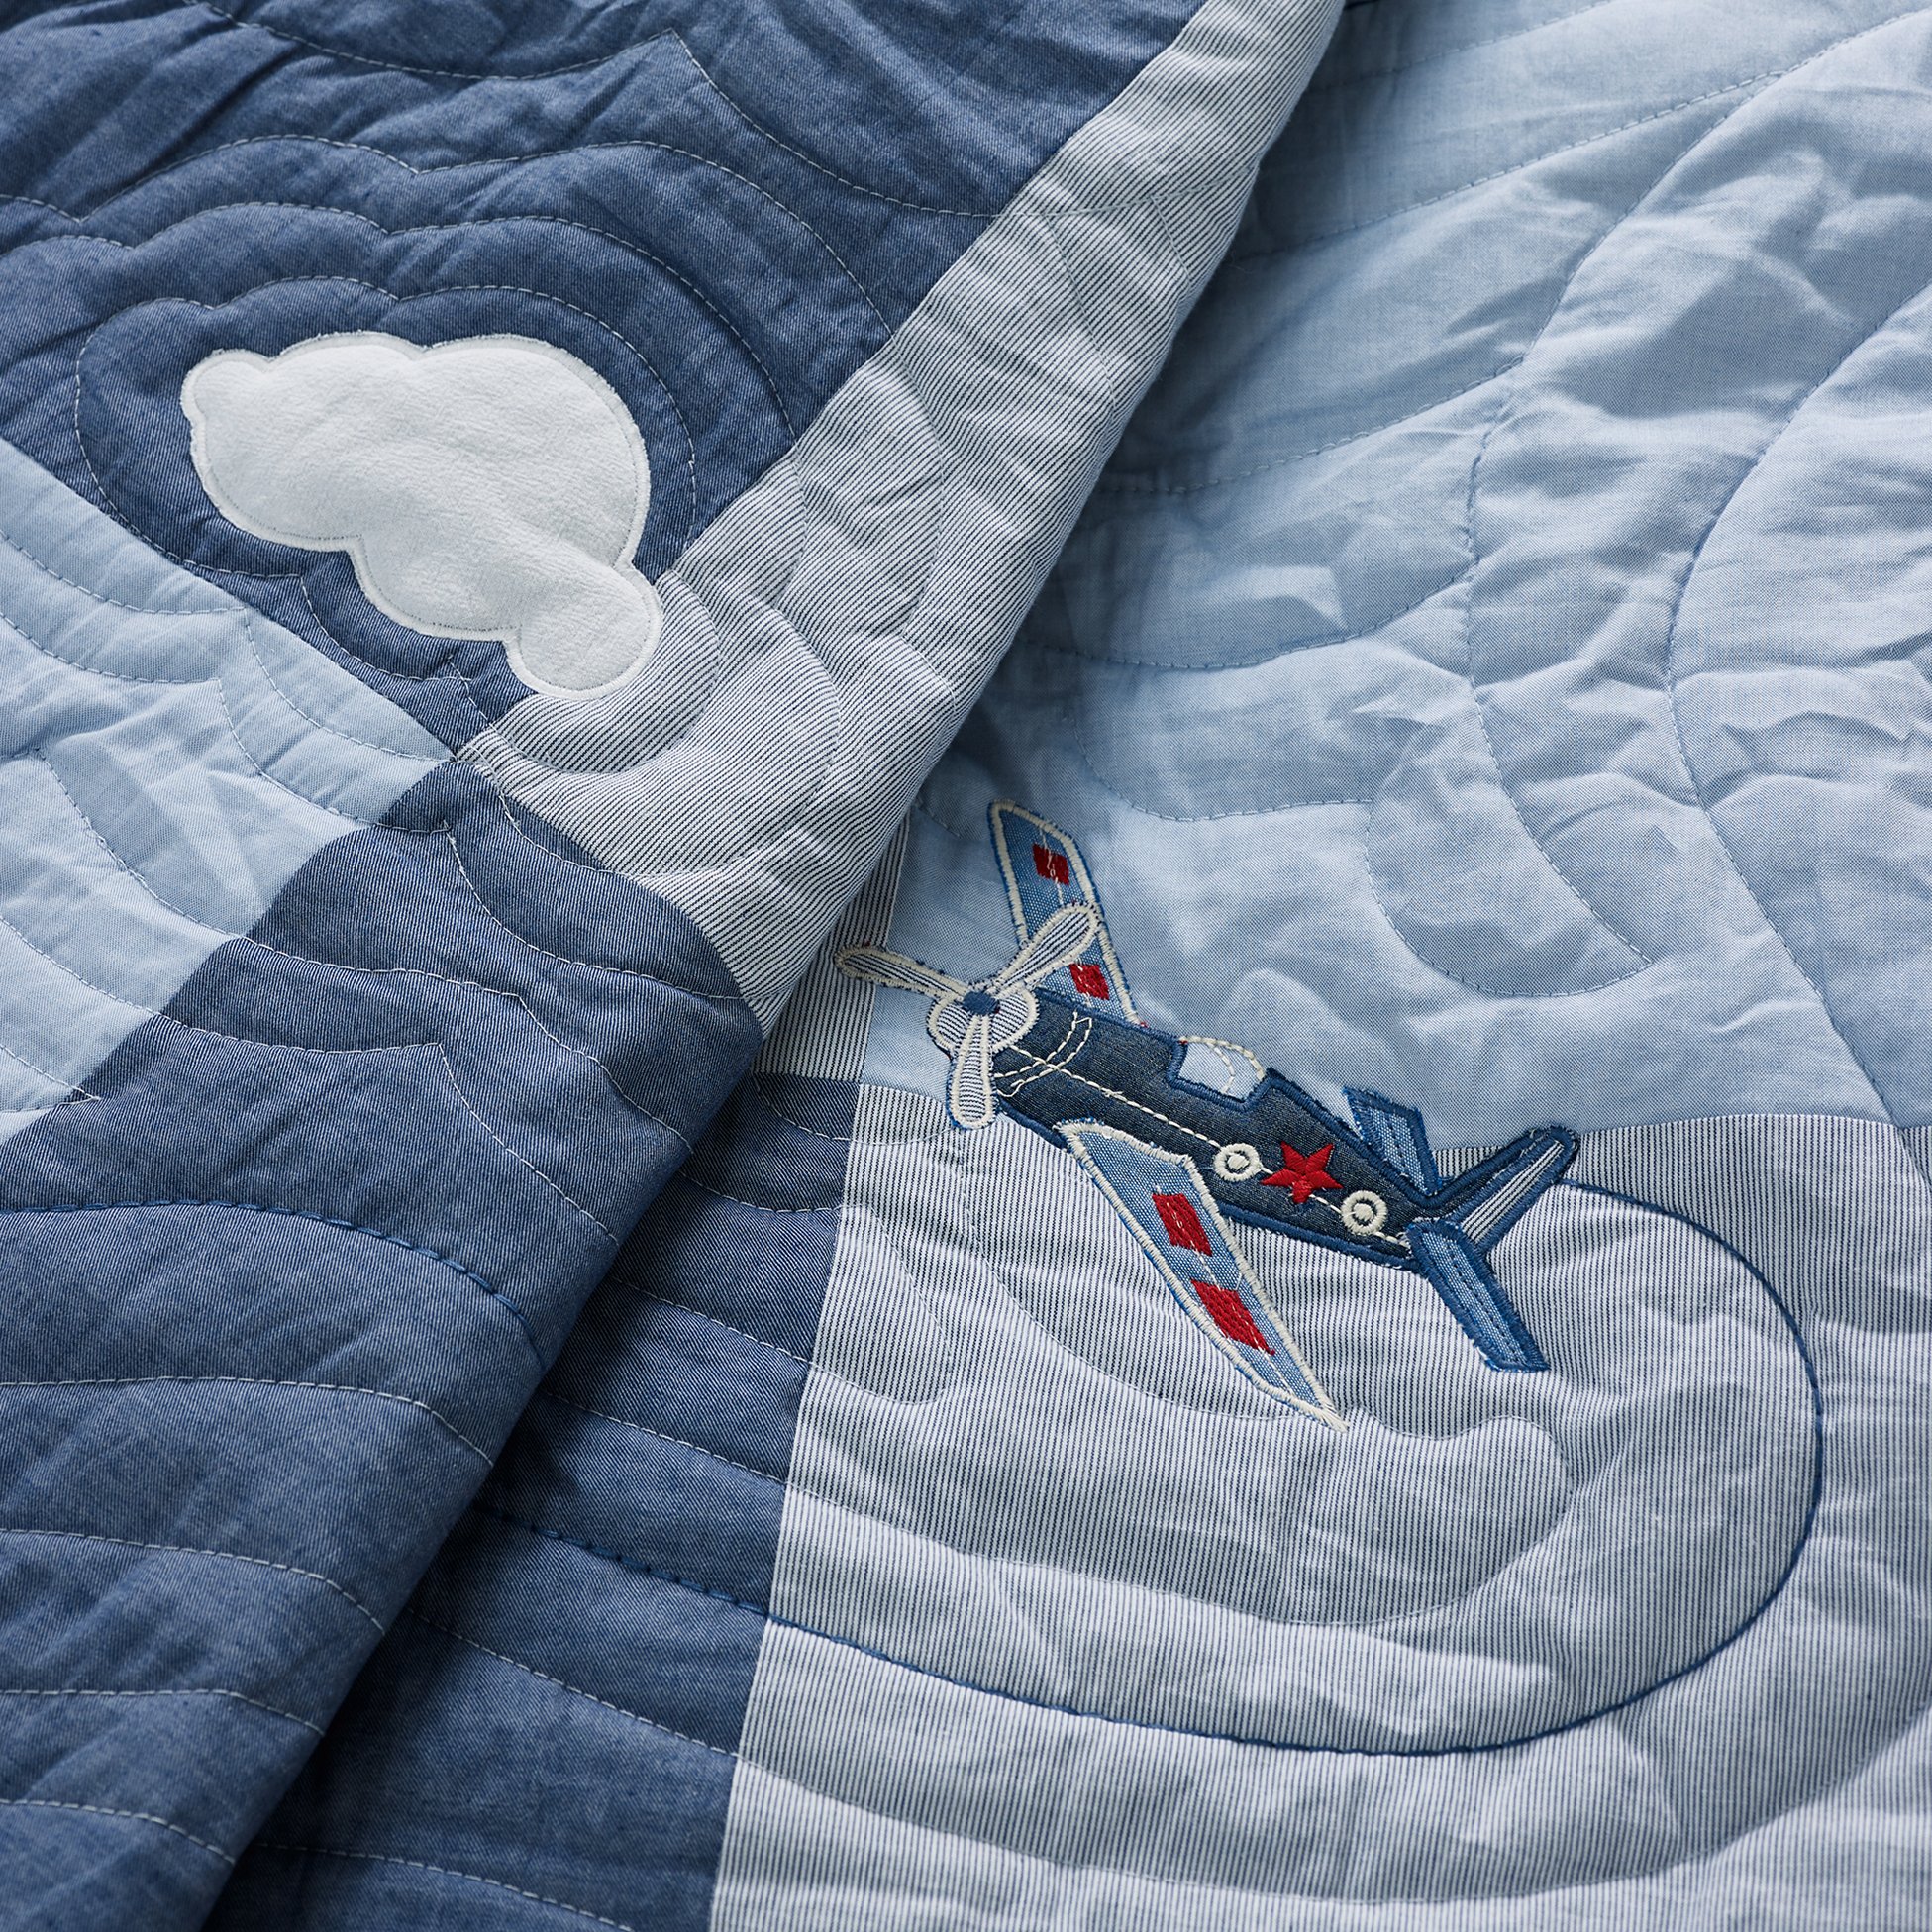 machine quilted- Planes and Planes Baby-Toddler quilt plane lover